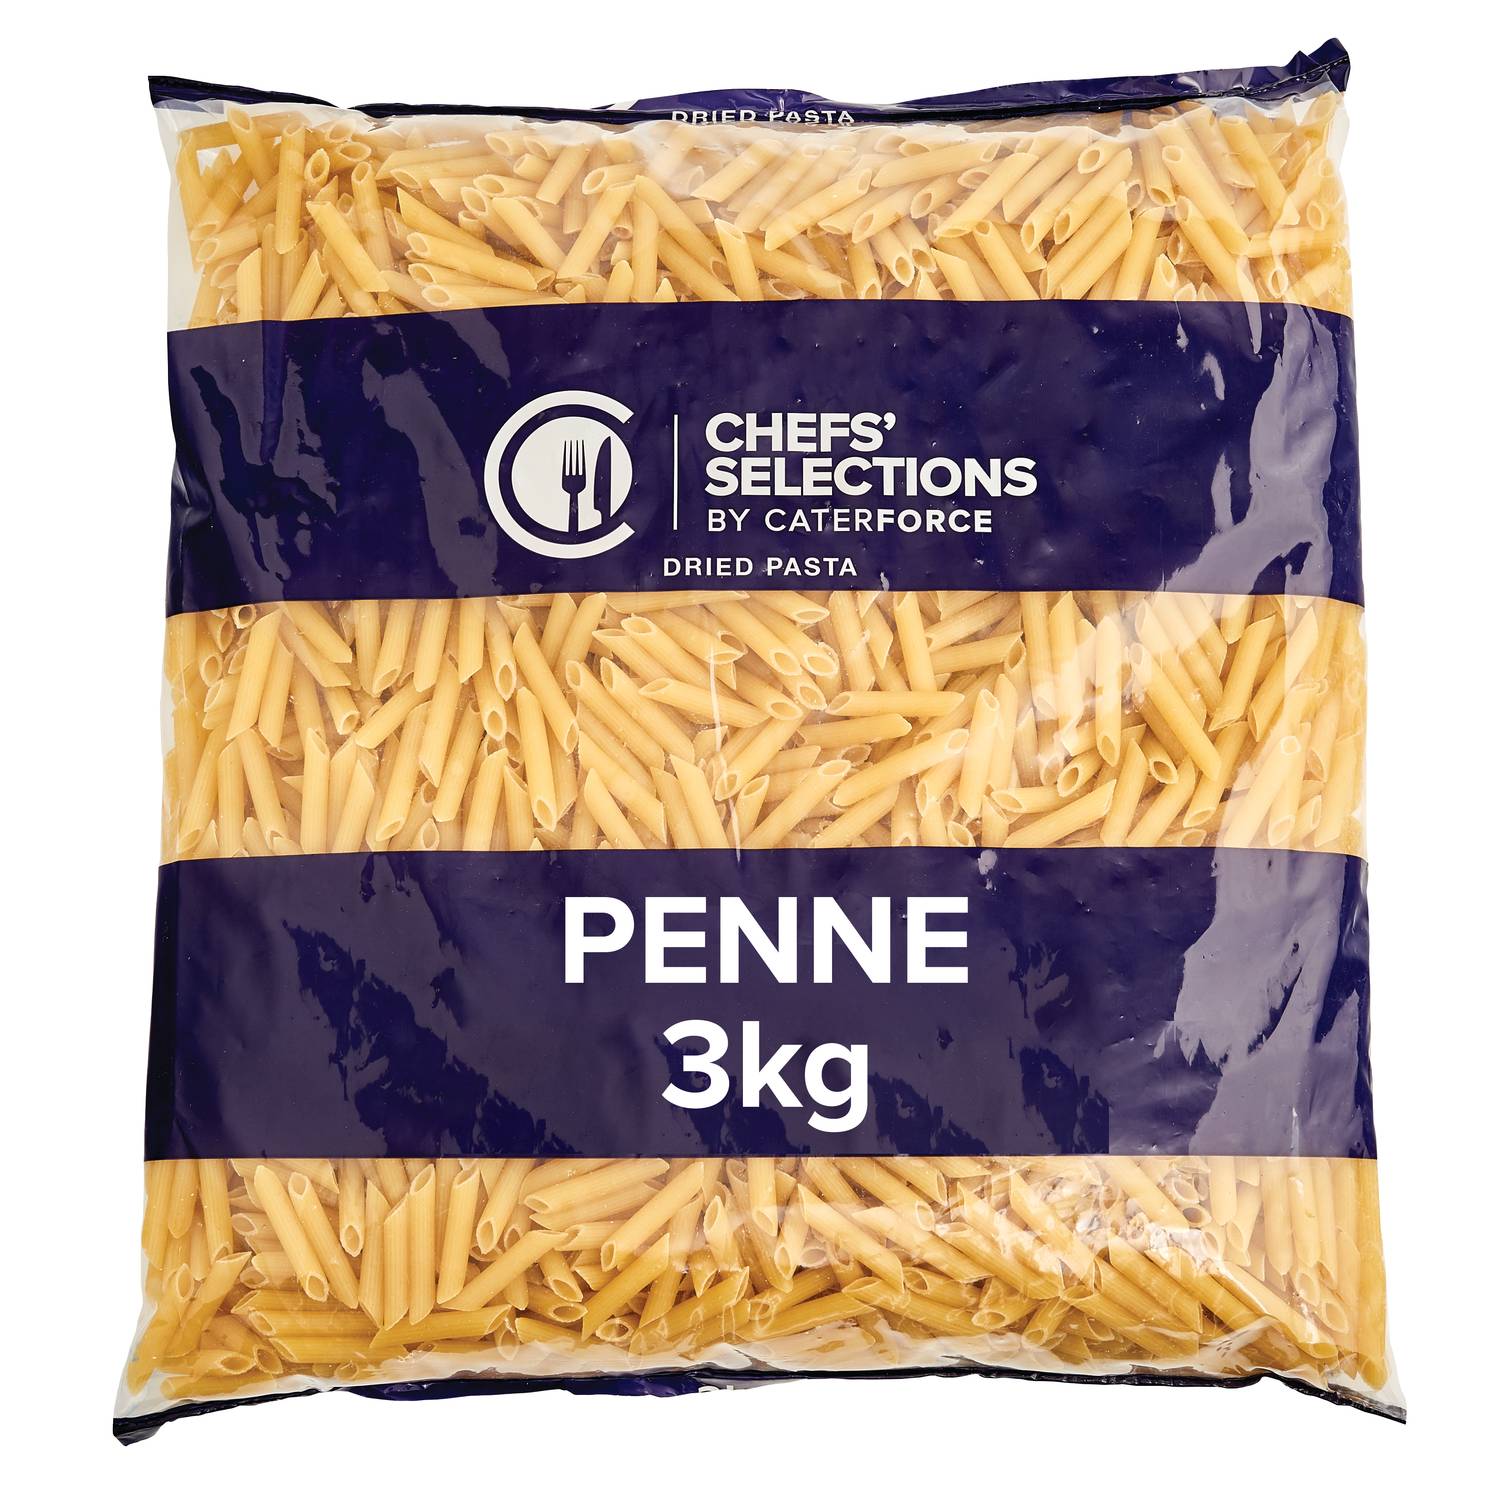 Chefs’ Selections Penne Pasta (4 x 3kg)